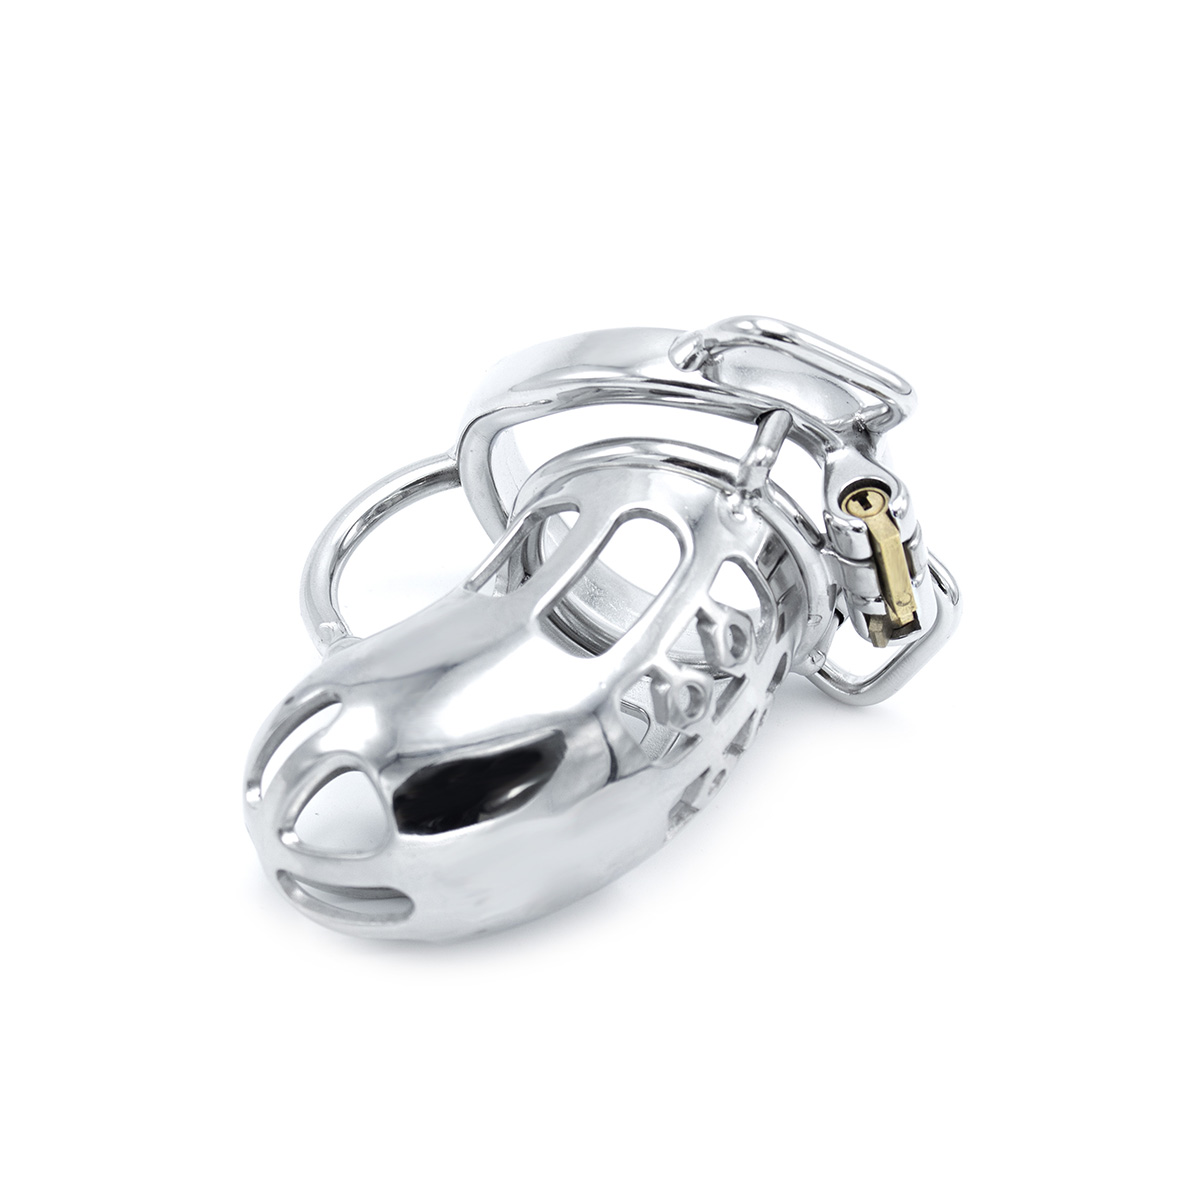 Belted-Chastity-Device-with-Ball-Divider-OPR-278014-8